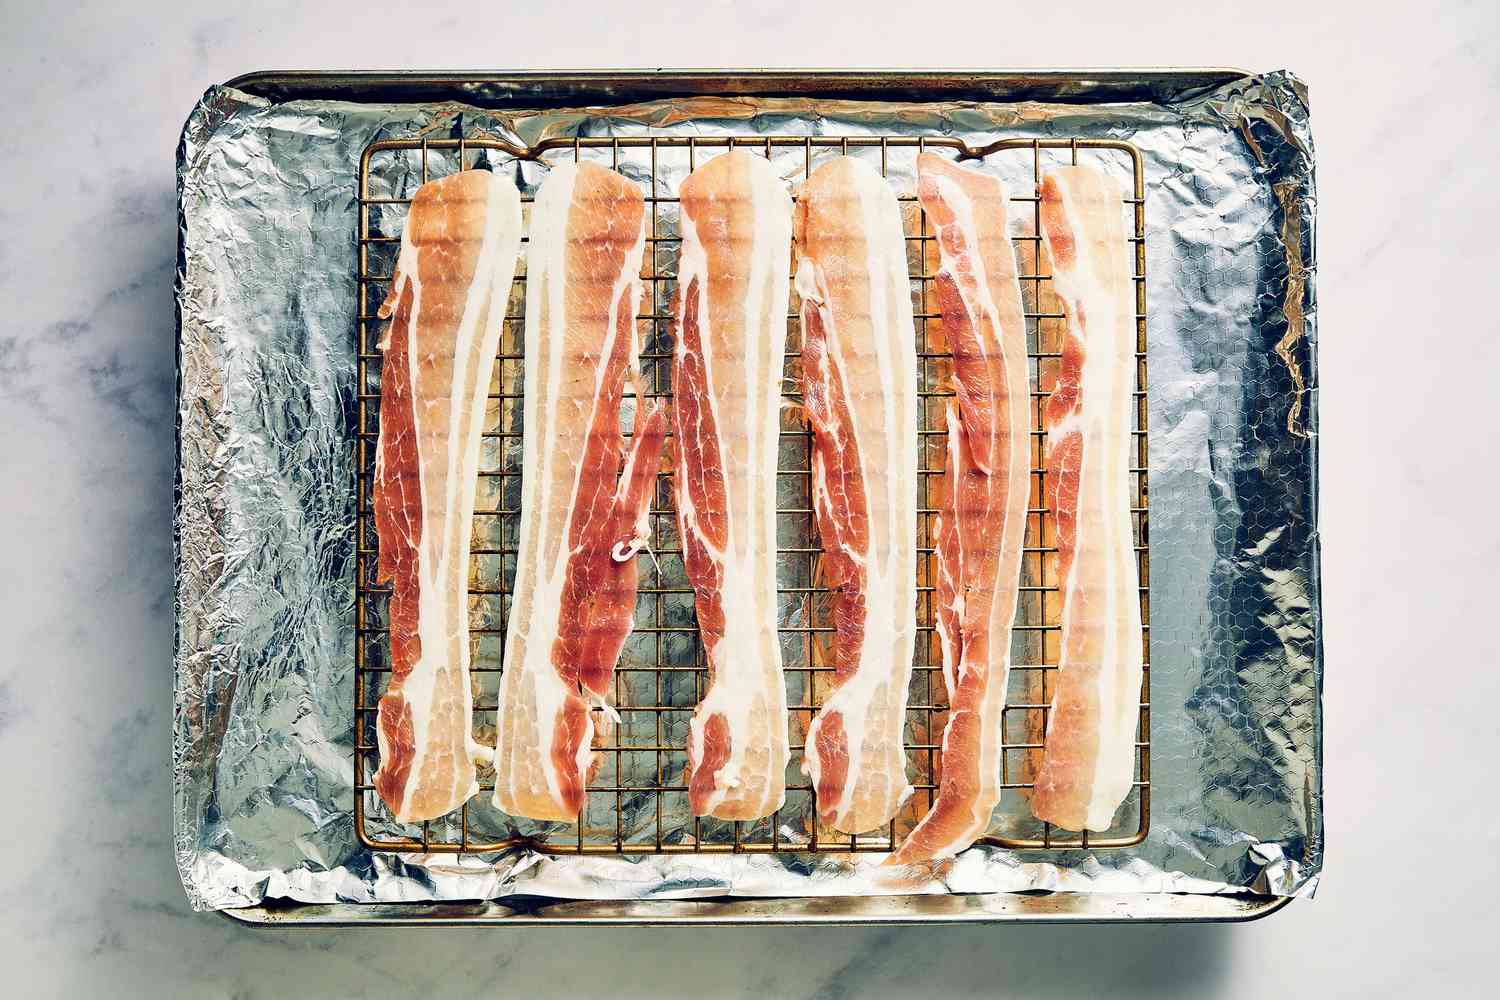 A sheet pan lined with foil with a baking rack, with thick pieces of thick cut bacon on the baking rack